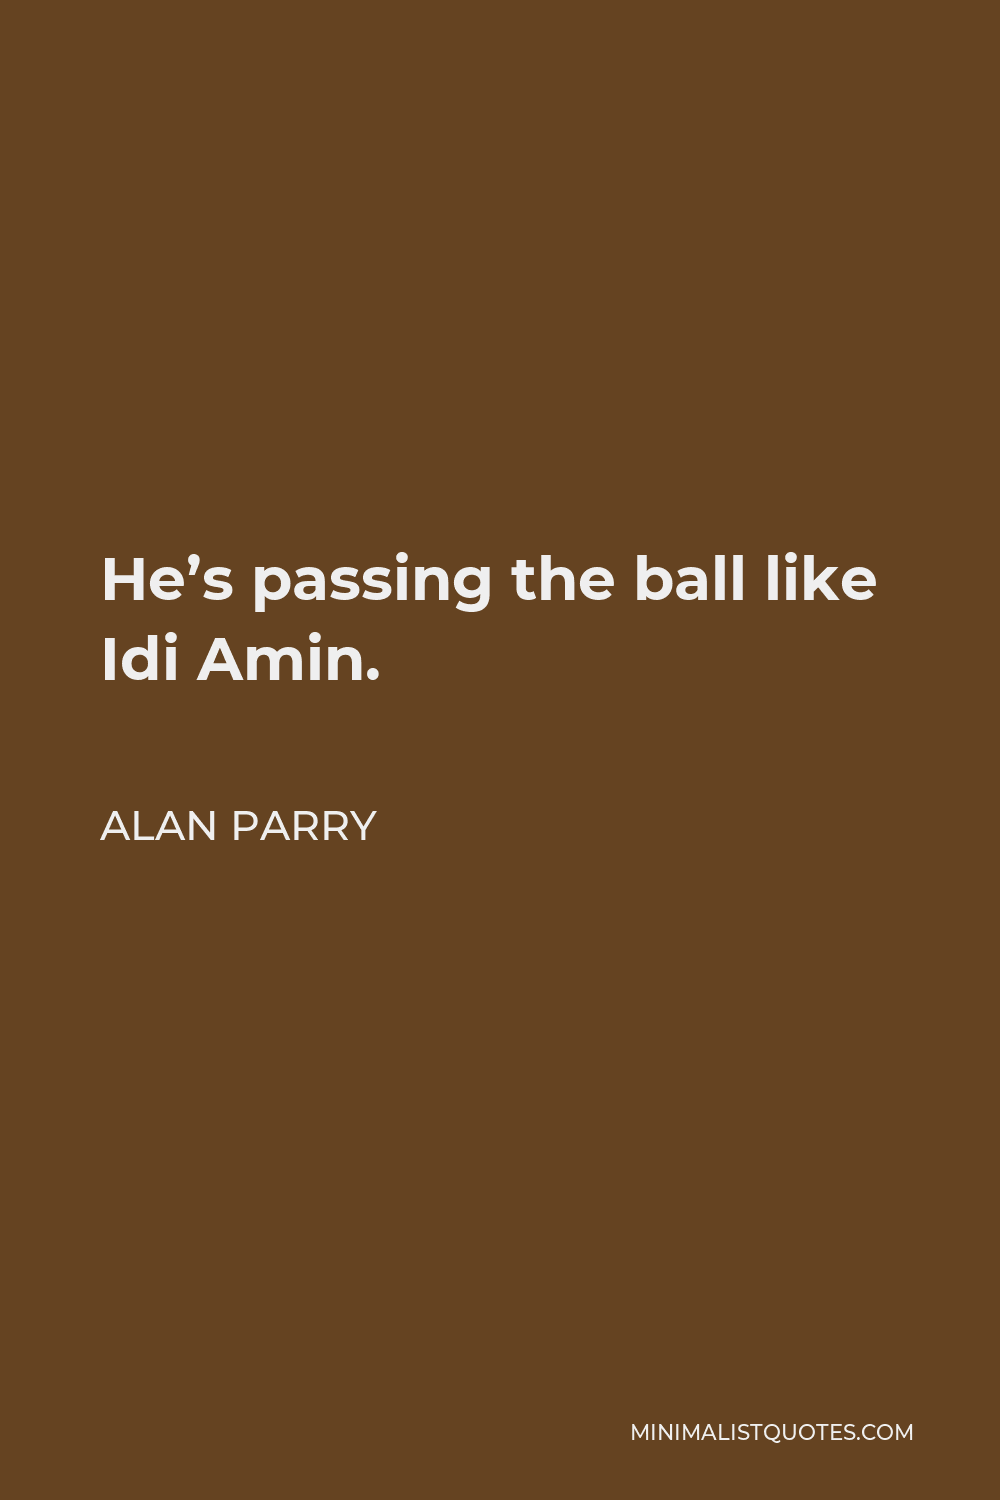 Alan Parry Quote - He’s passing the ball like Idi Amin.